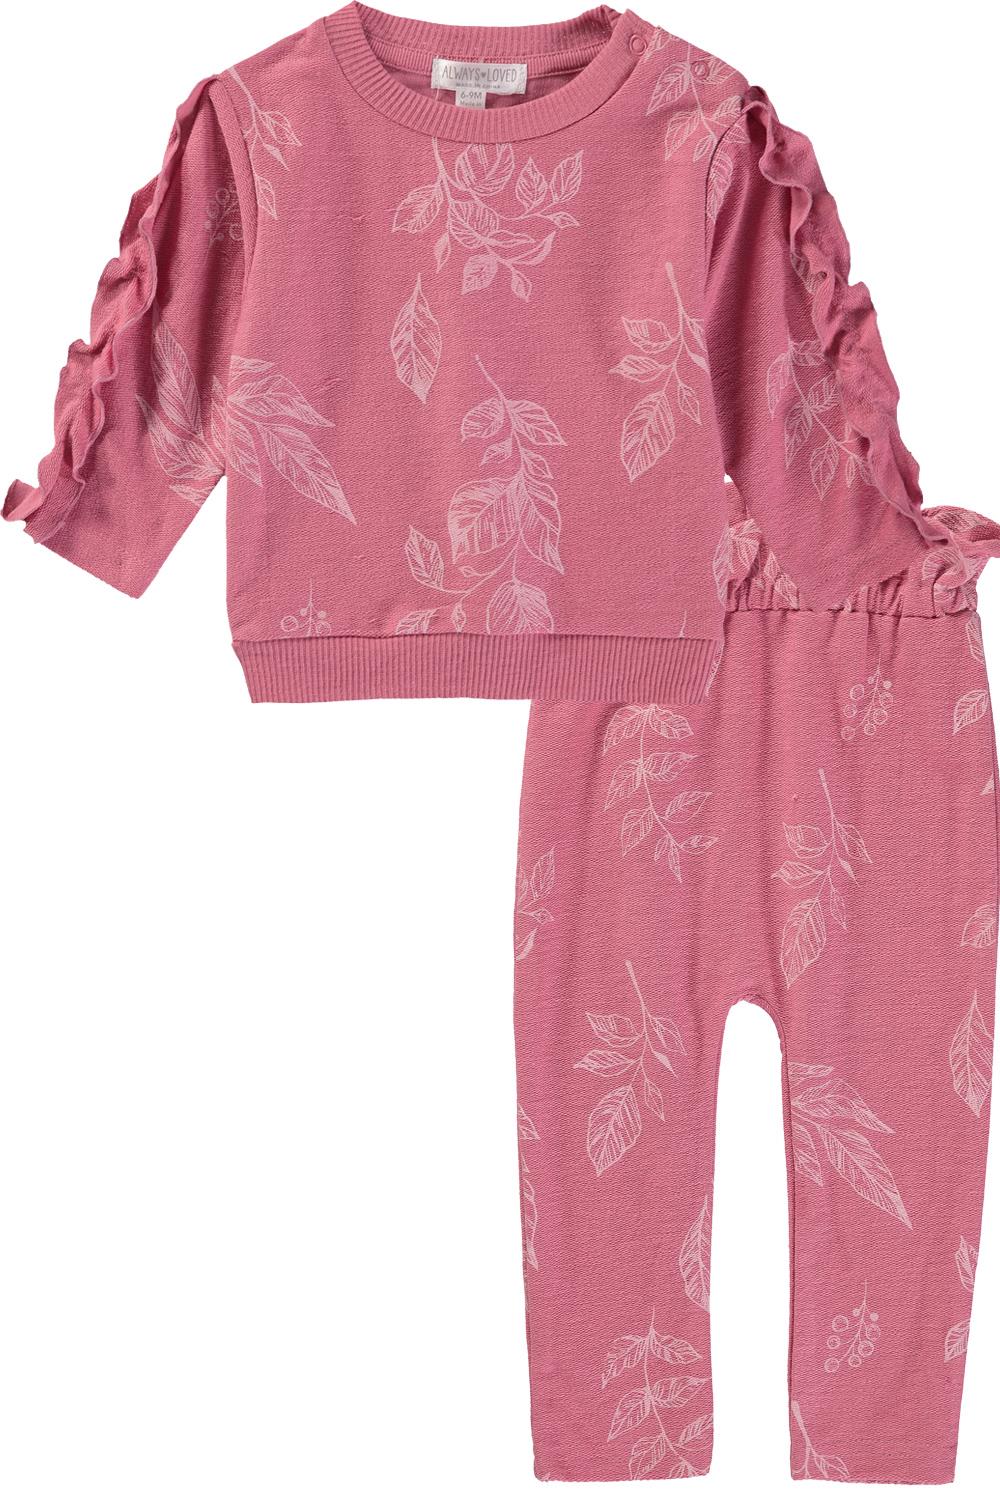 Always Loved Girls 0-9 Months 2-Piece Ruffle Floral Pant Set